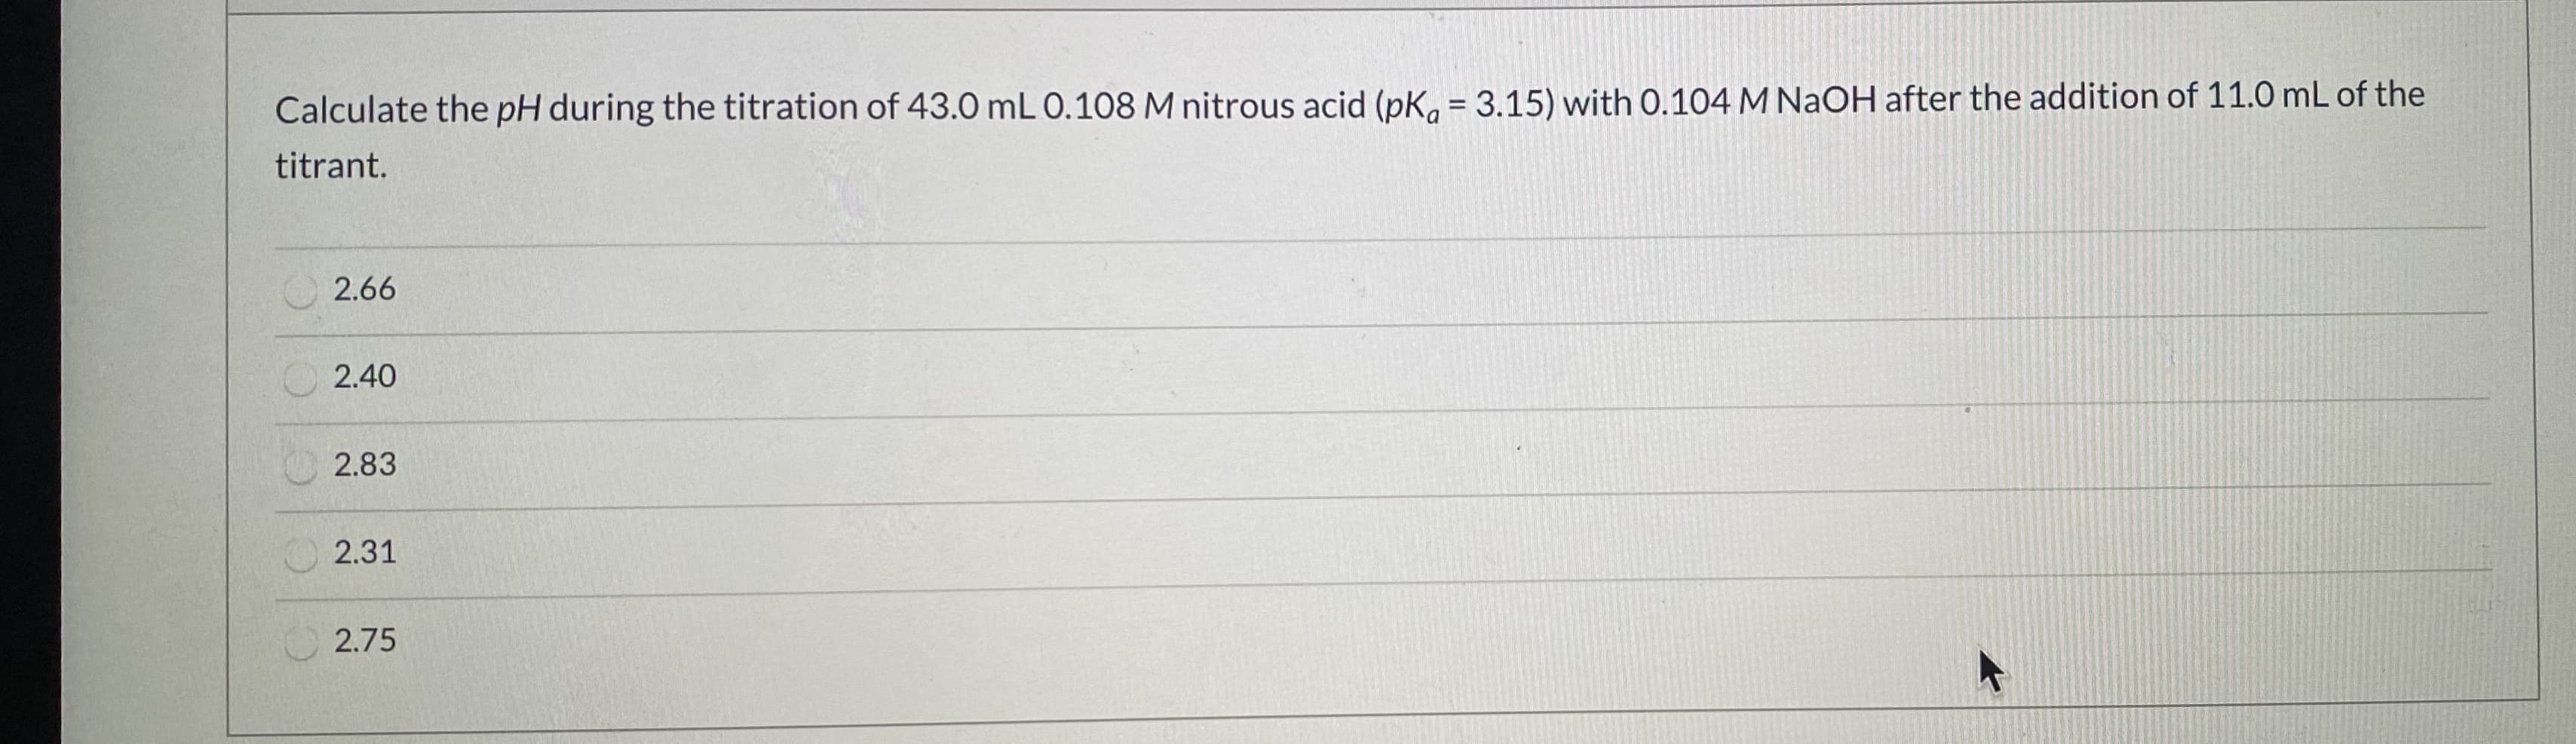 Calculate the pH during the titration of 43.0 mL 0.108 M nitrous acid (pK, = 3.15) with 0.104 M NAOH after the addition of 11.0mL of the
titrant.
%3D
2.66
2.40
2.83
2.31
2.75
